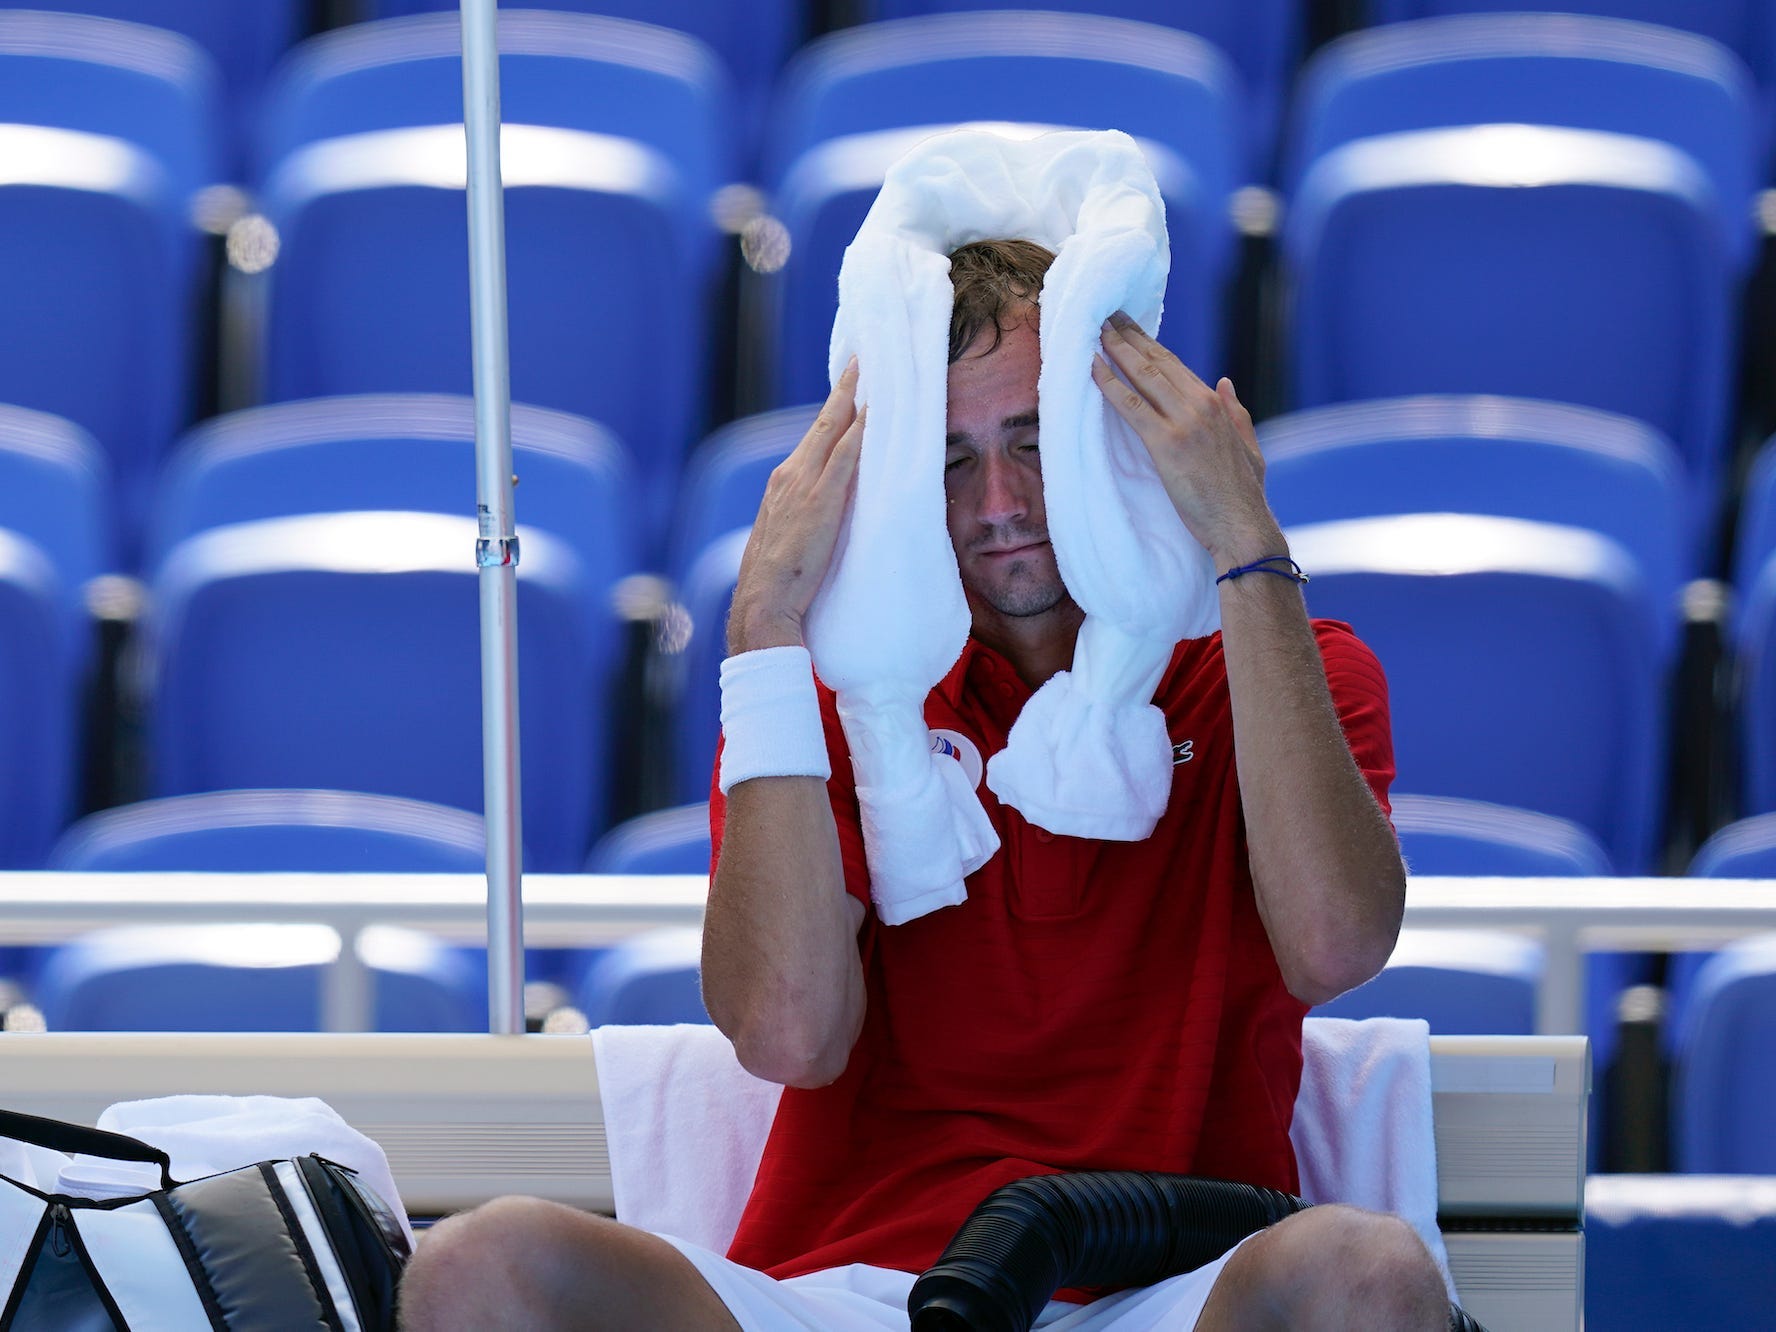 Daniiel Medvedev holds a towel to his head at the Tokyo Olympics.